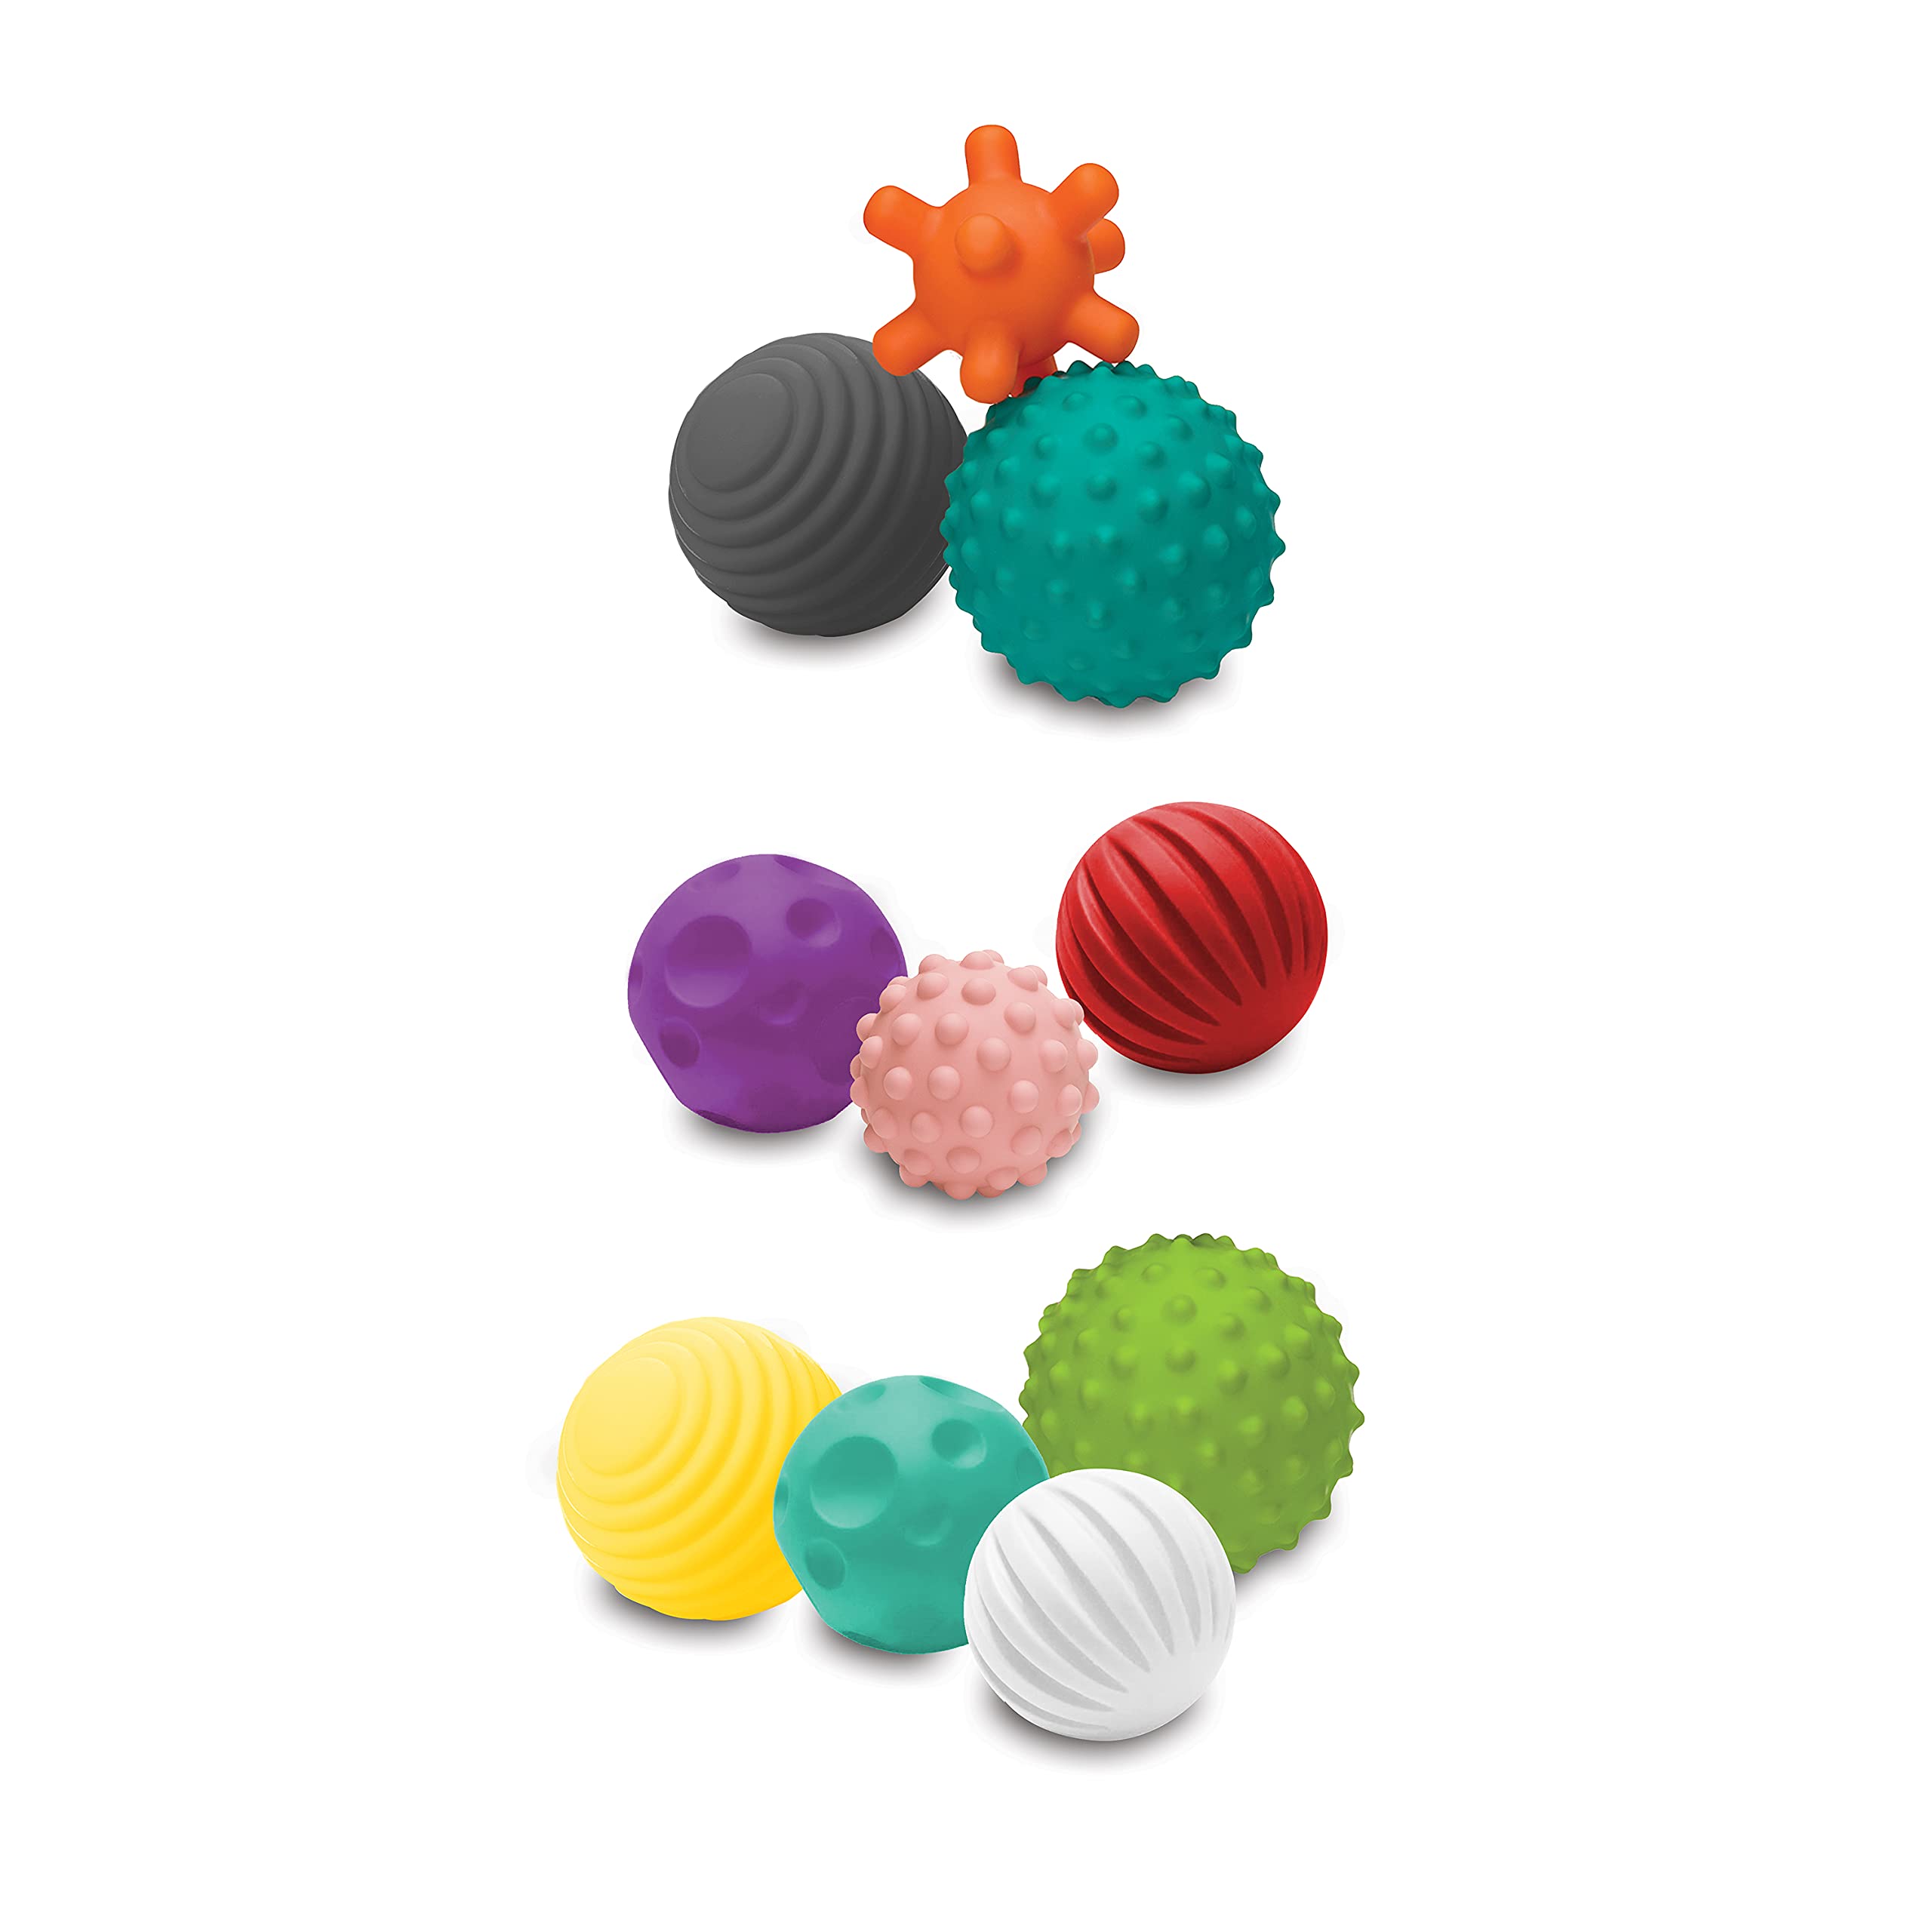 Infantino Textured Multi Ball Set - Toy for Sensory Exploration and Engagement for Ages 6 Months and up, 10 Piece Set